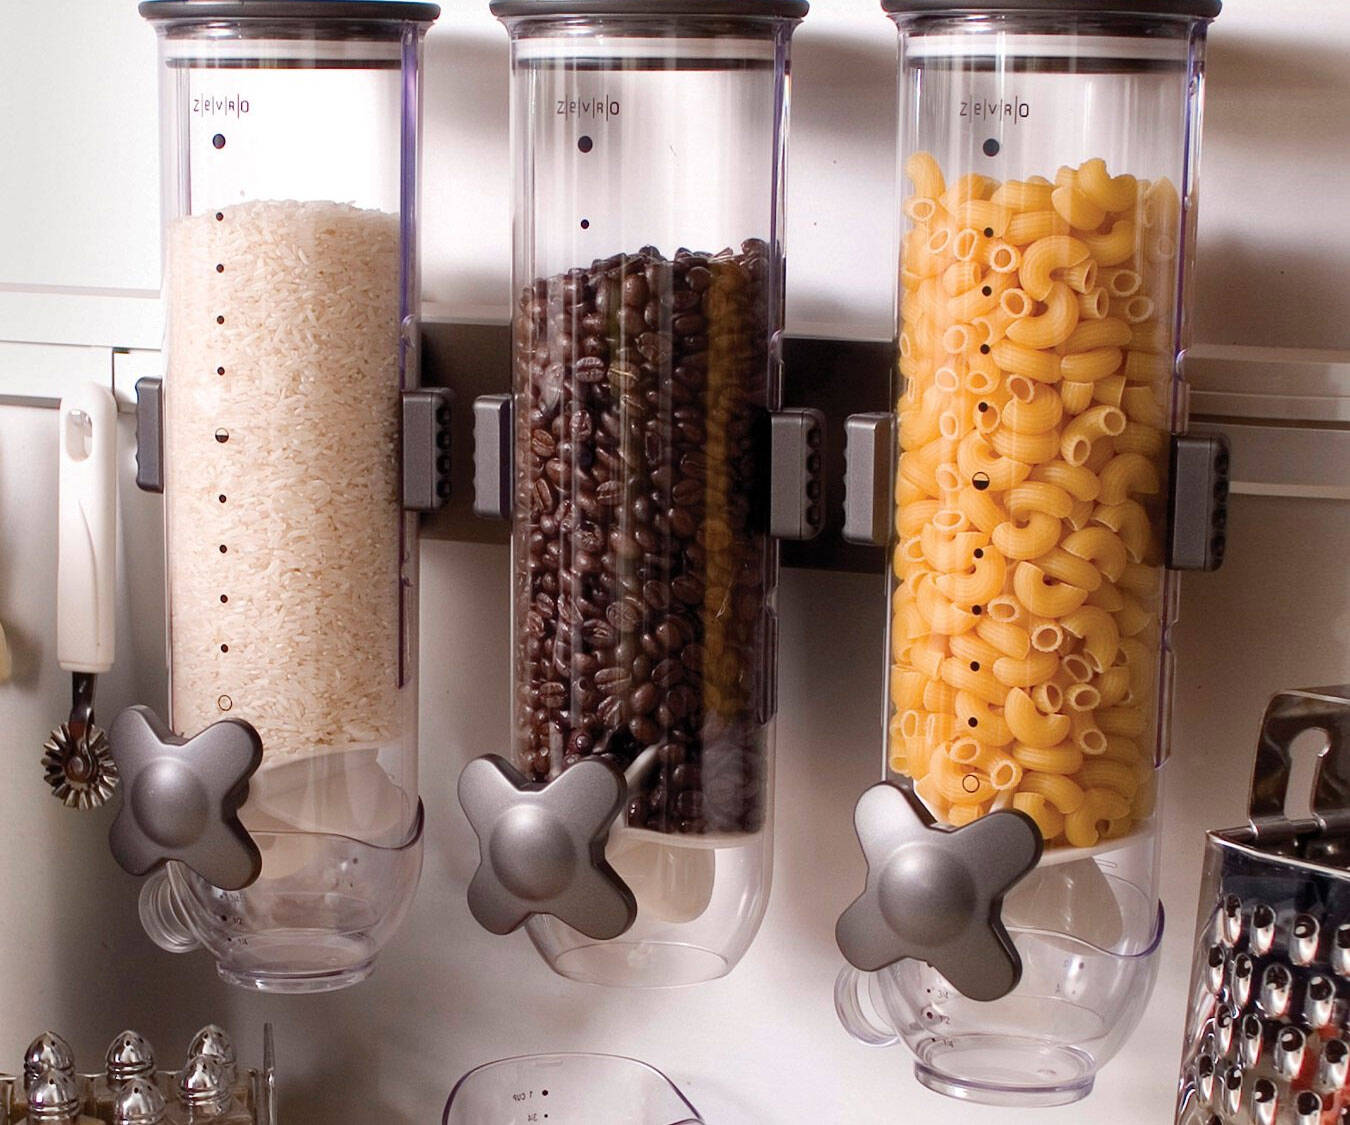 Wall Mounted Triple Dry Food Dispenser - //coolthings.us